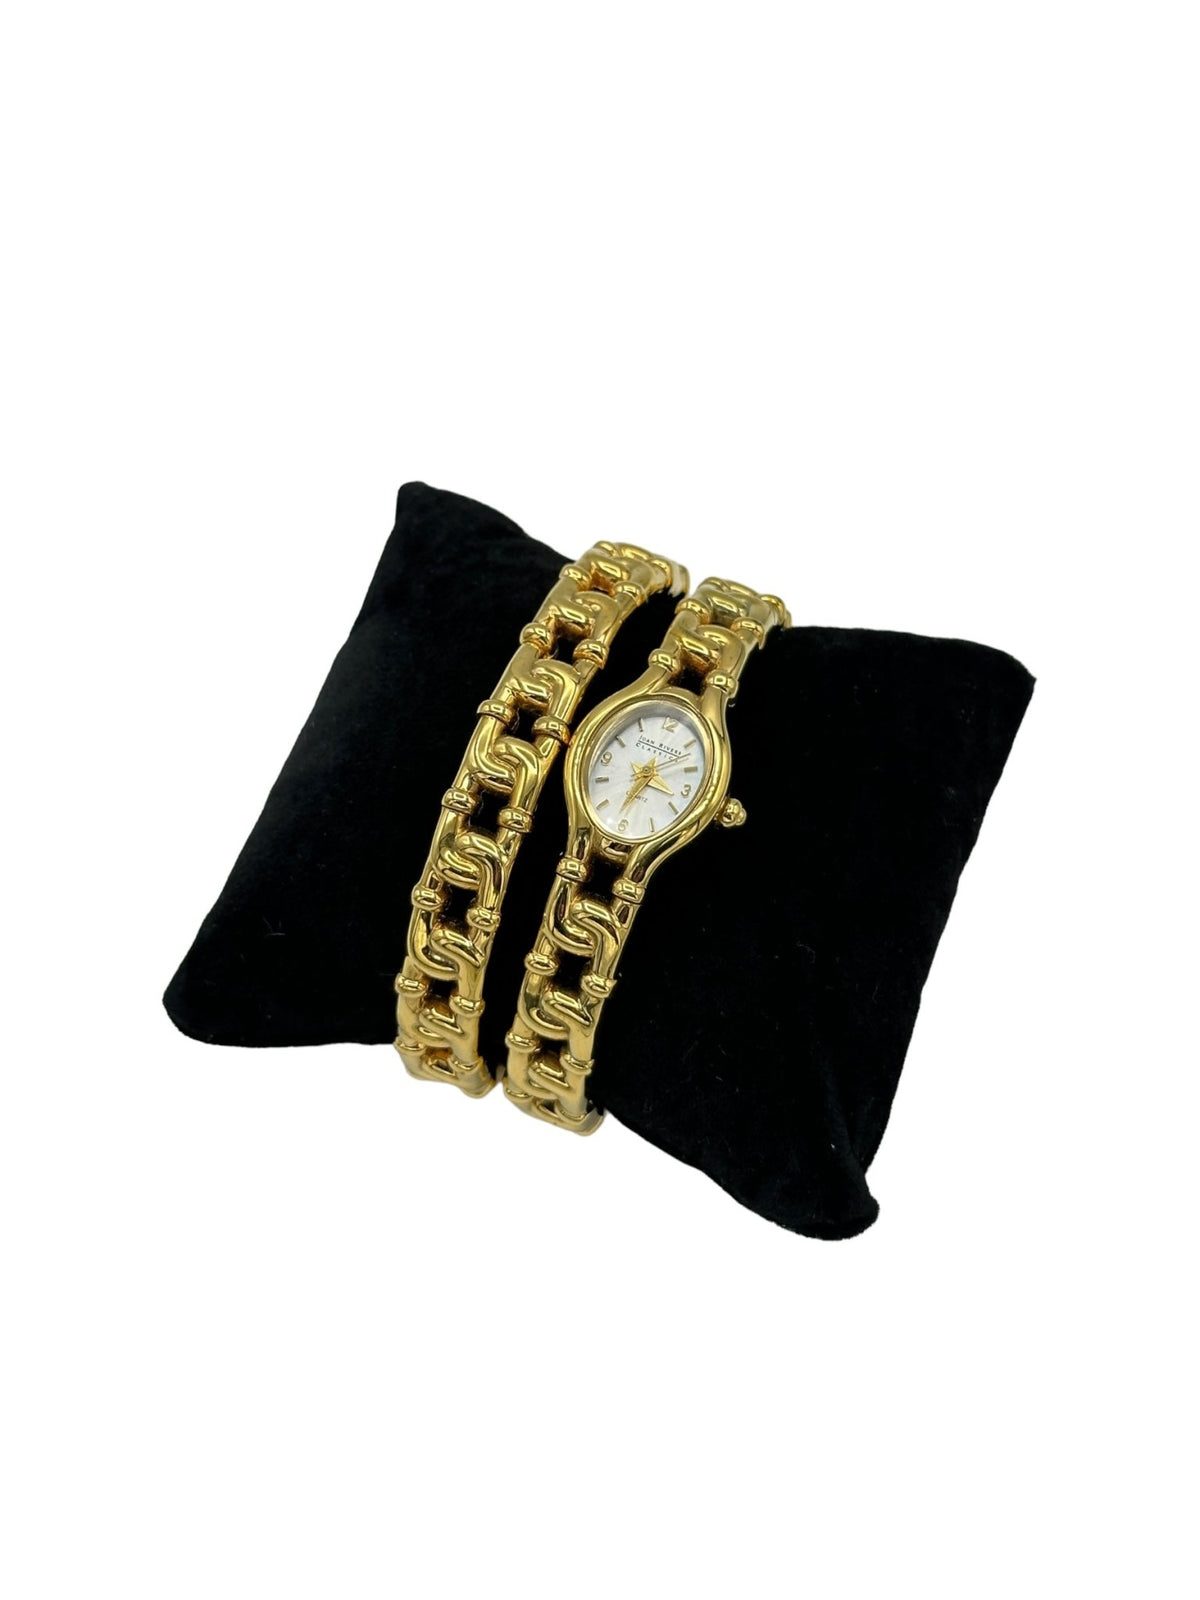 Joan Rivers Gold Chain Link Cuff Wristwatch with Matching Bracelet - 24 Wishes Vintage Jewelry